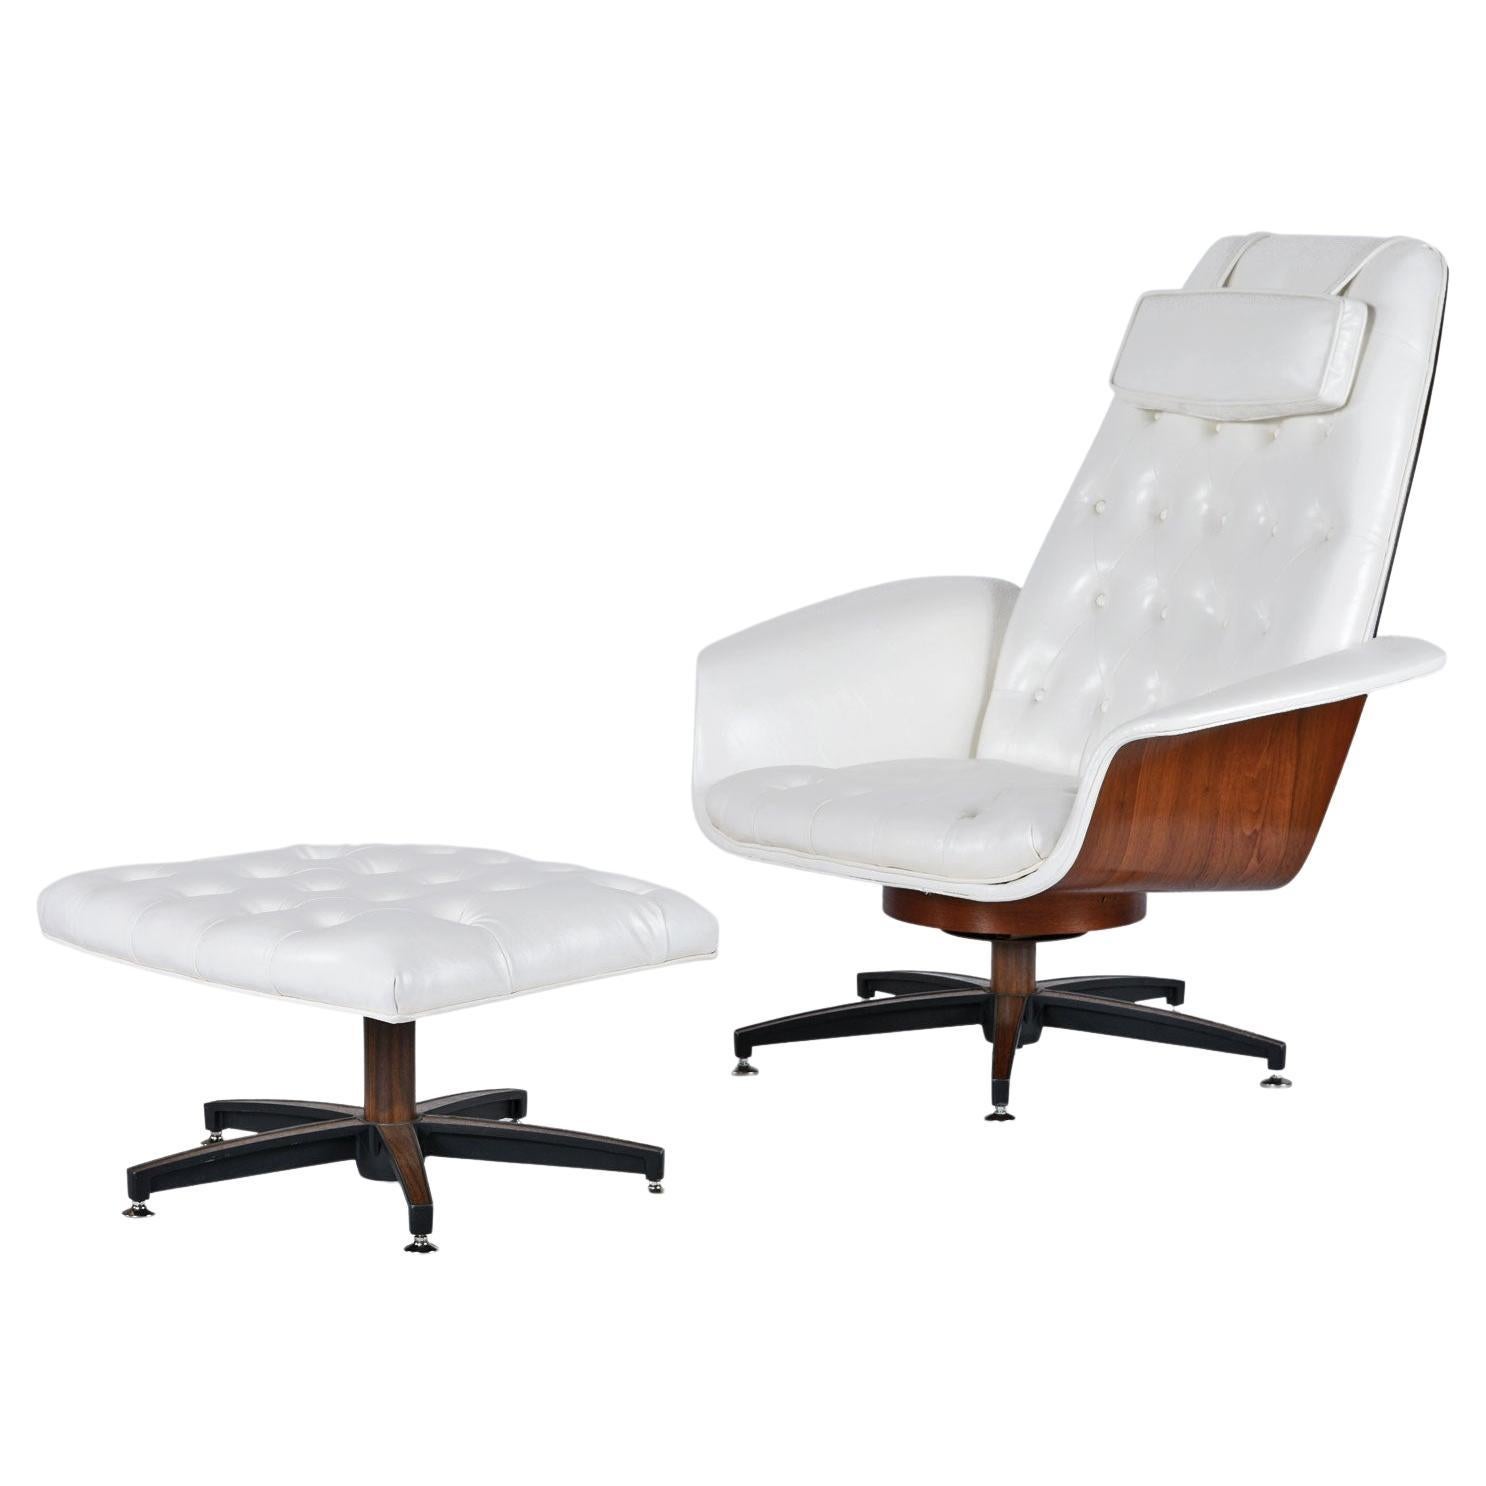 Restored Pair of Bent Ply Faux White Tufted Leather George Mulhauser Mr. Chairs In Good Condition For Sale In Chattanooga, TN